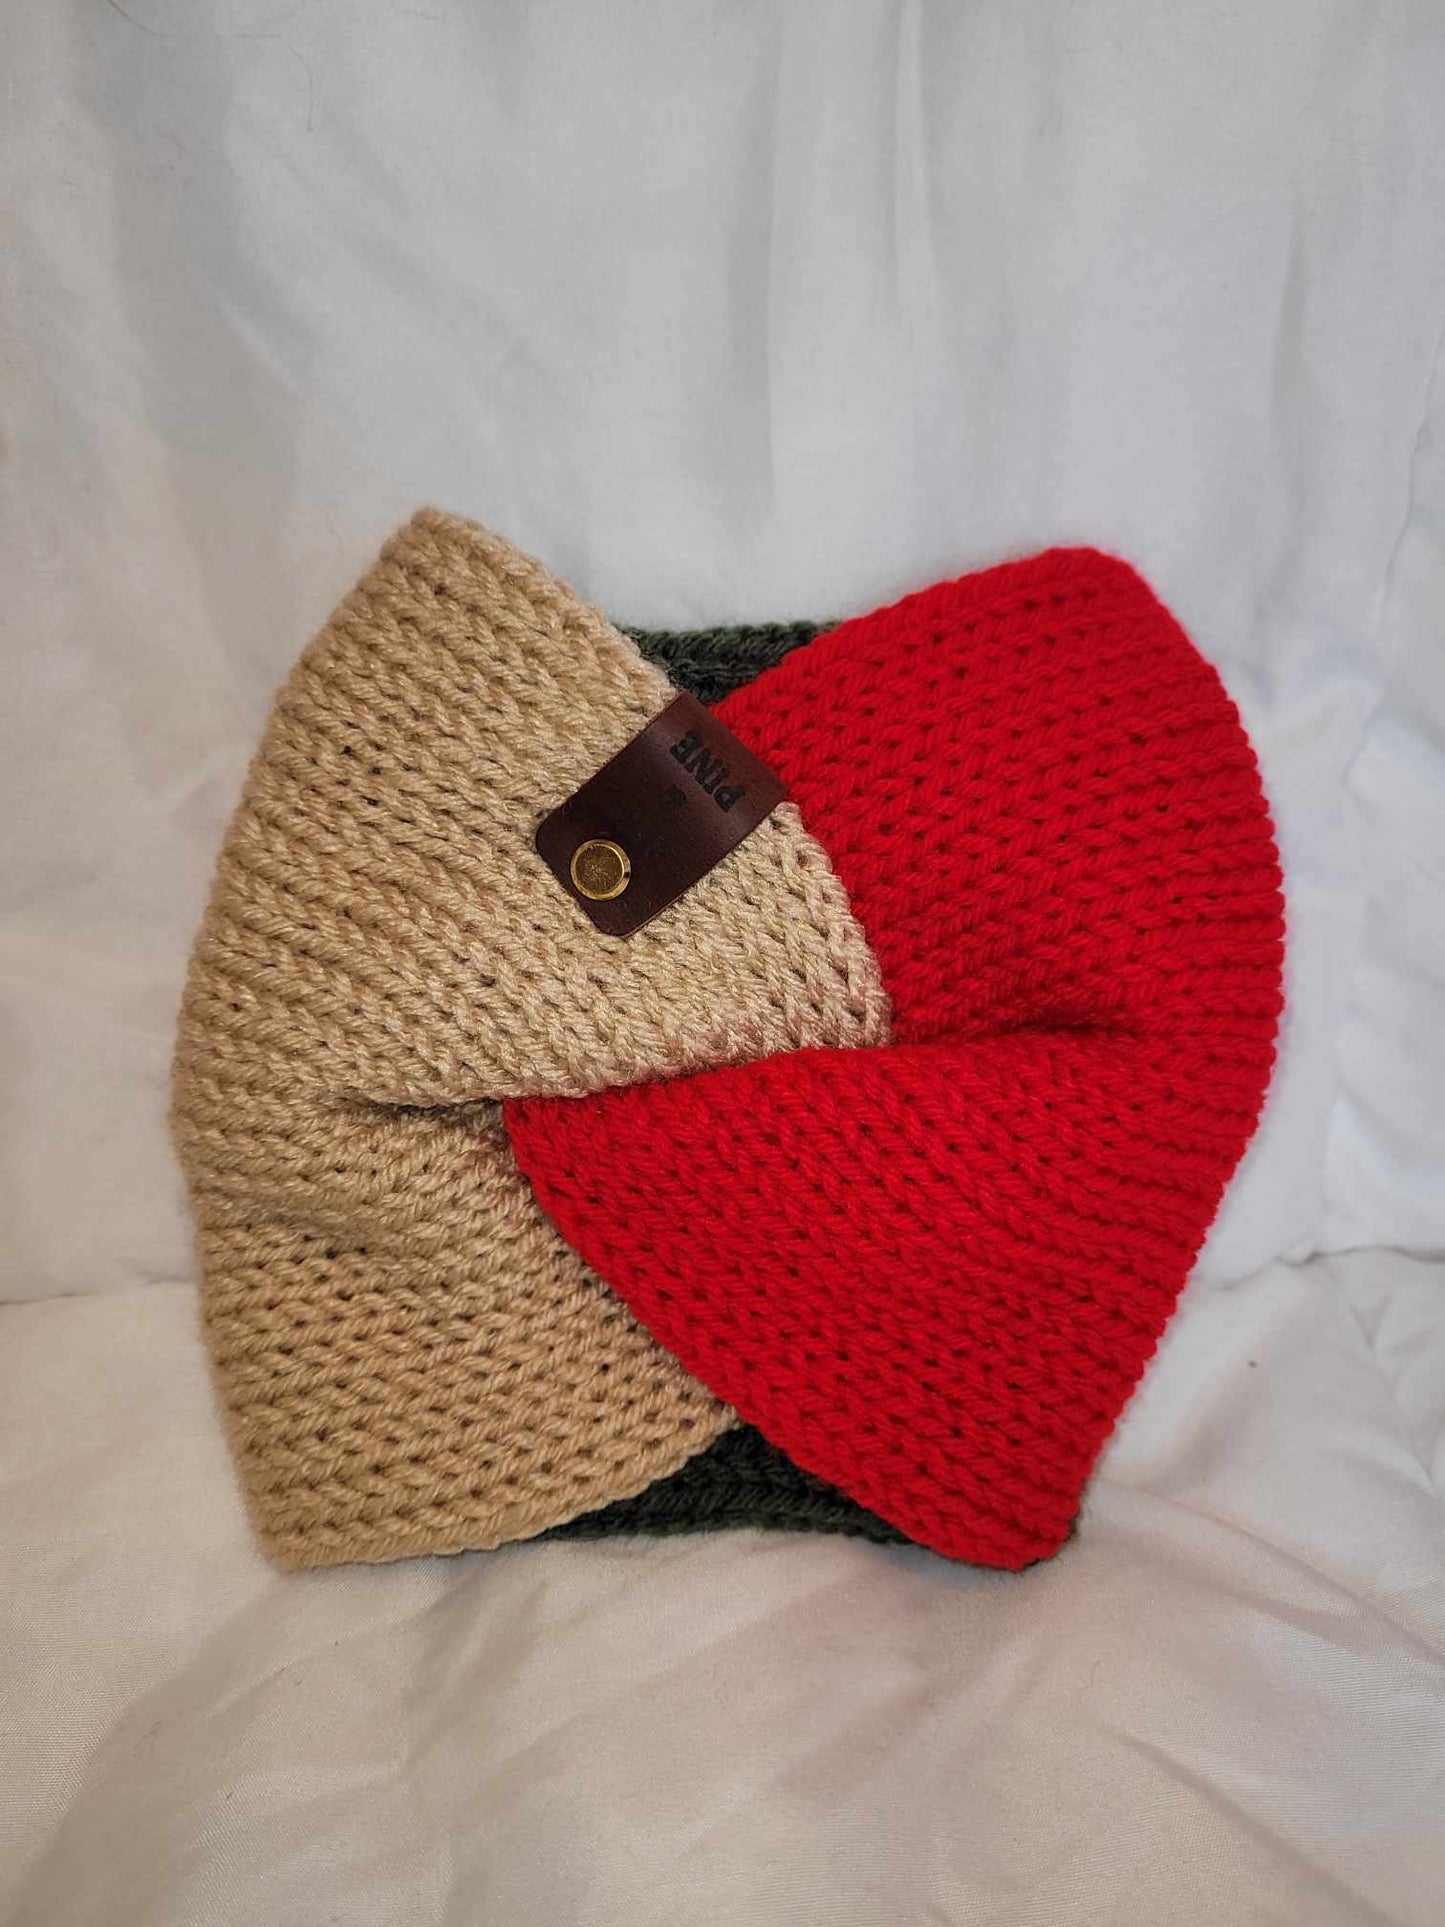 Pedro's Knit Cozy: Handcrafted Hats & Headbands – Unique Styles for Every Season!!